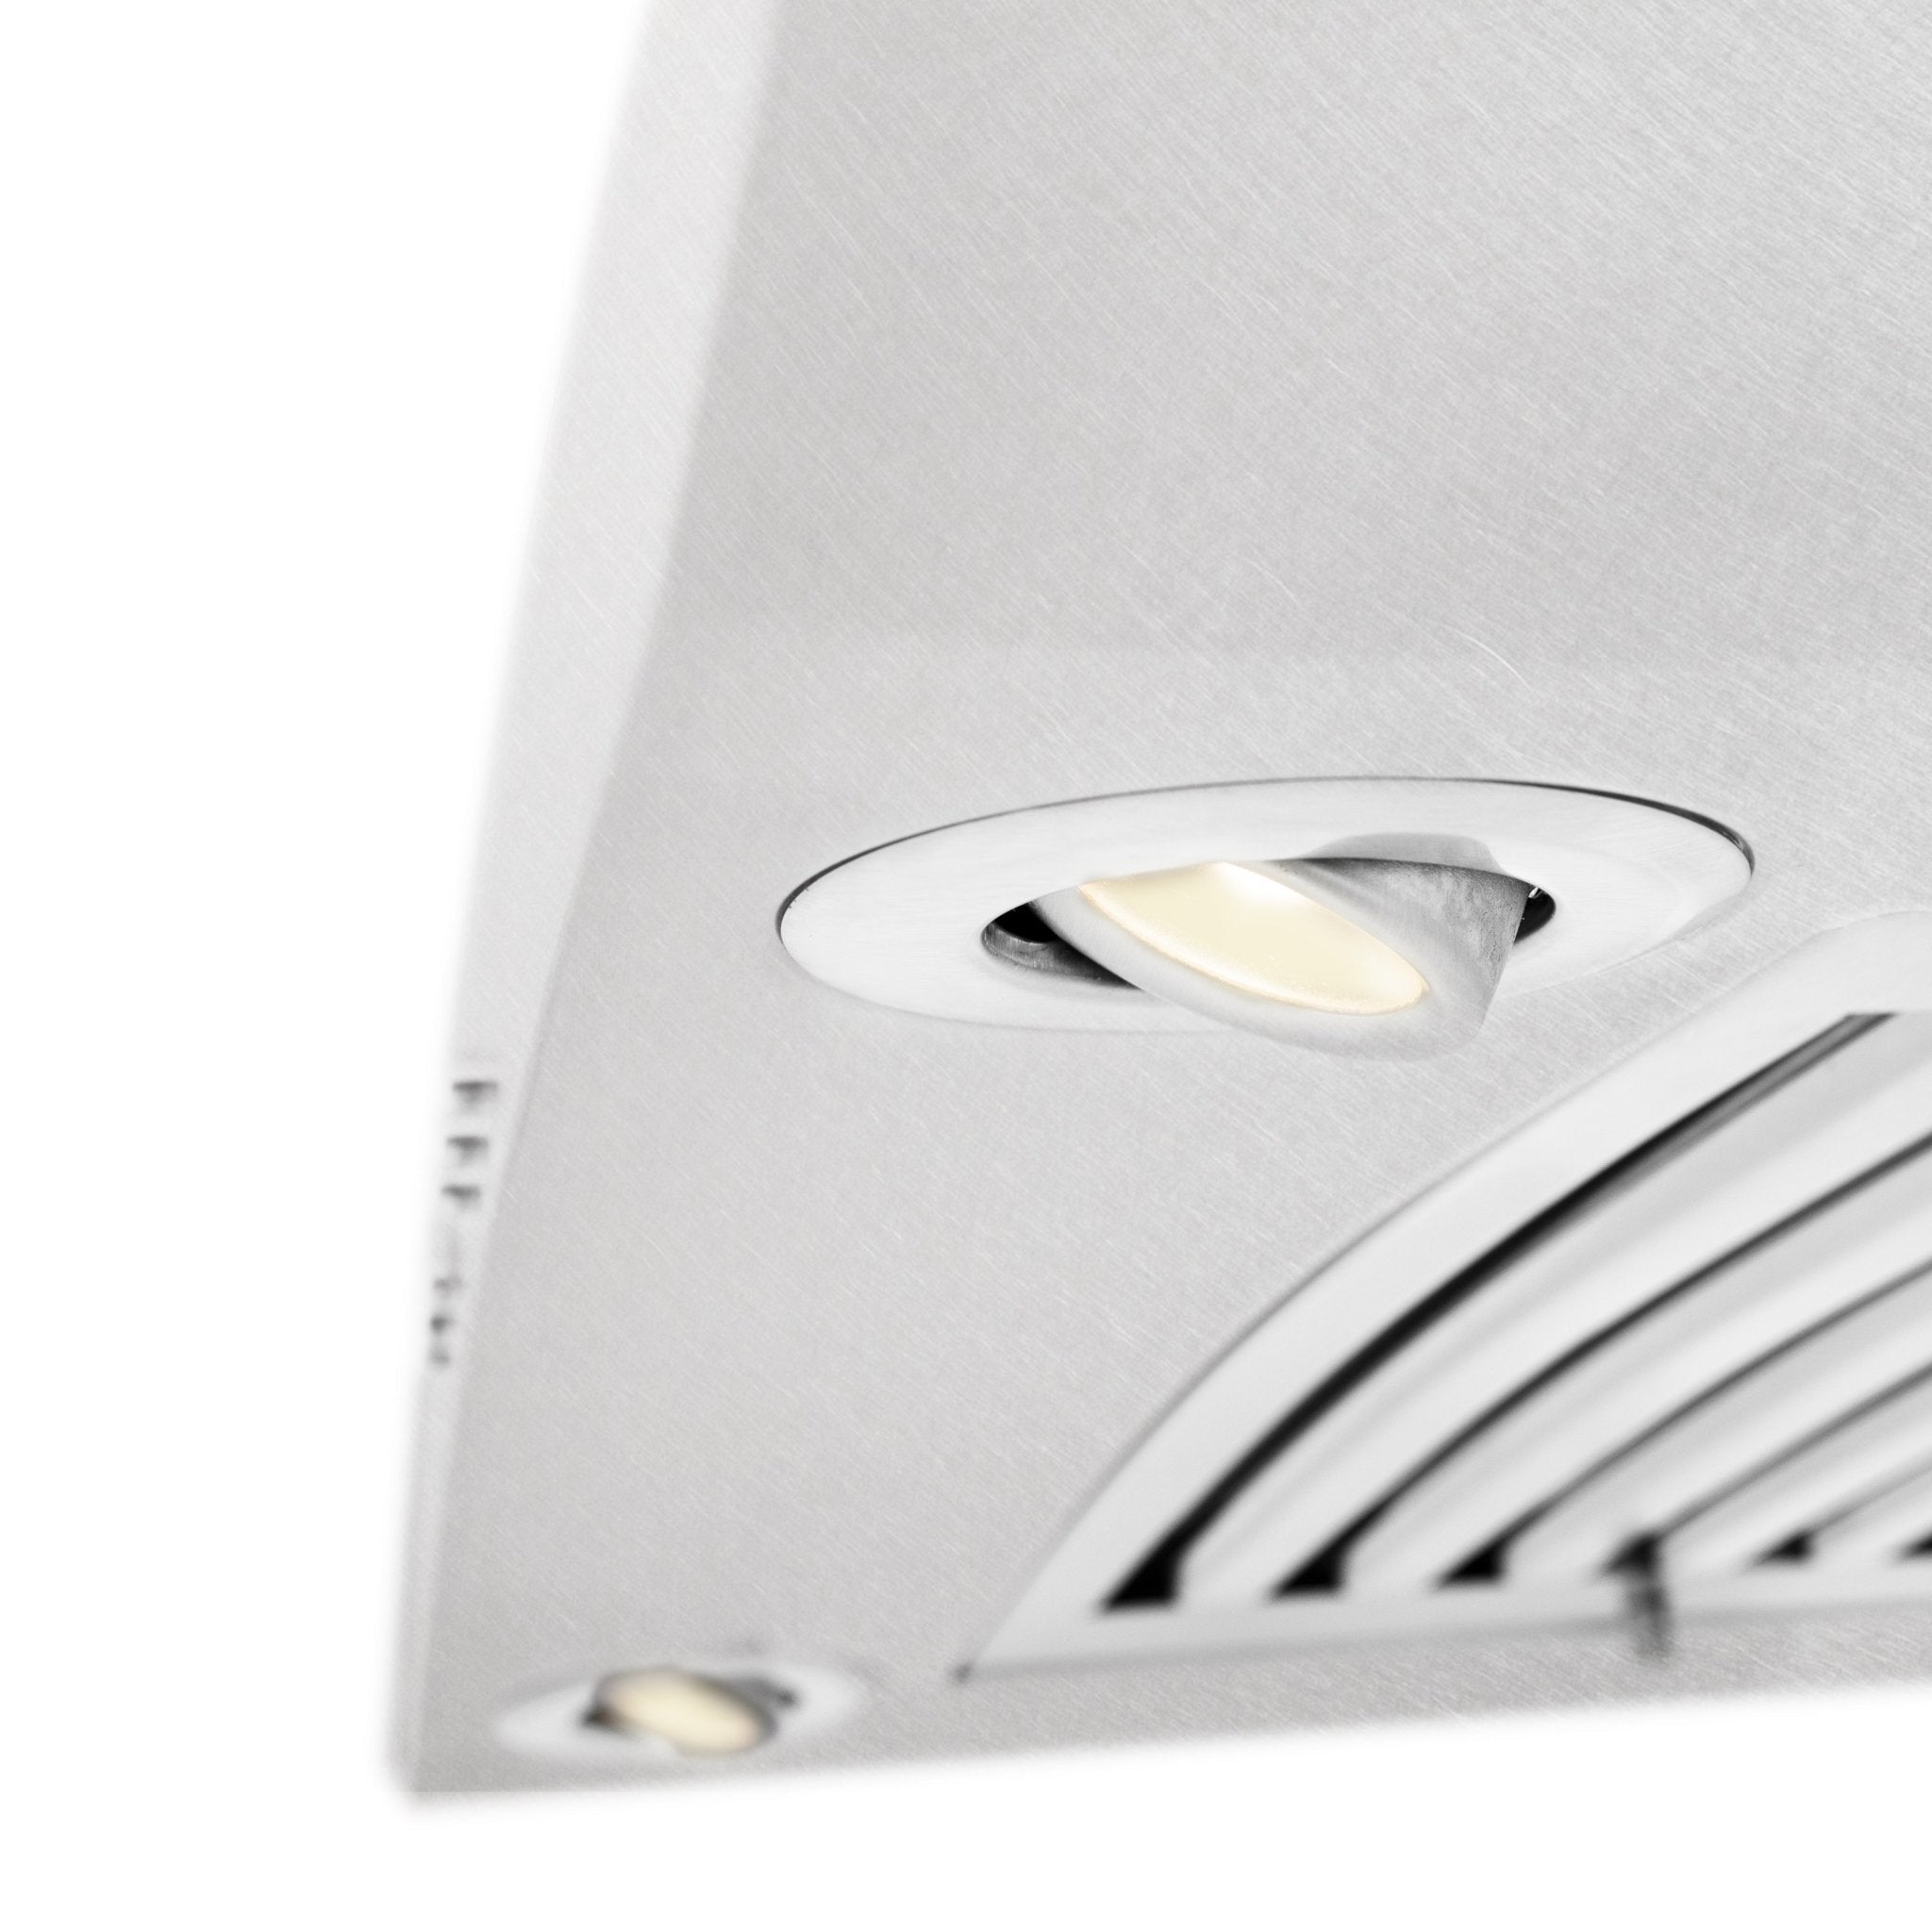 Built-in directional LED cooktop lighting close up with DuraSnow texture.